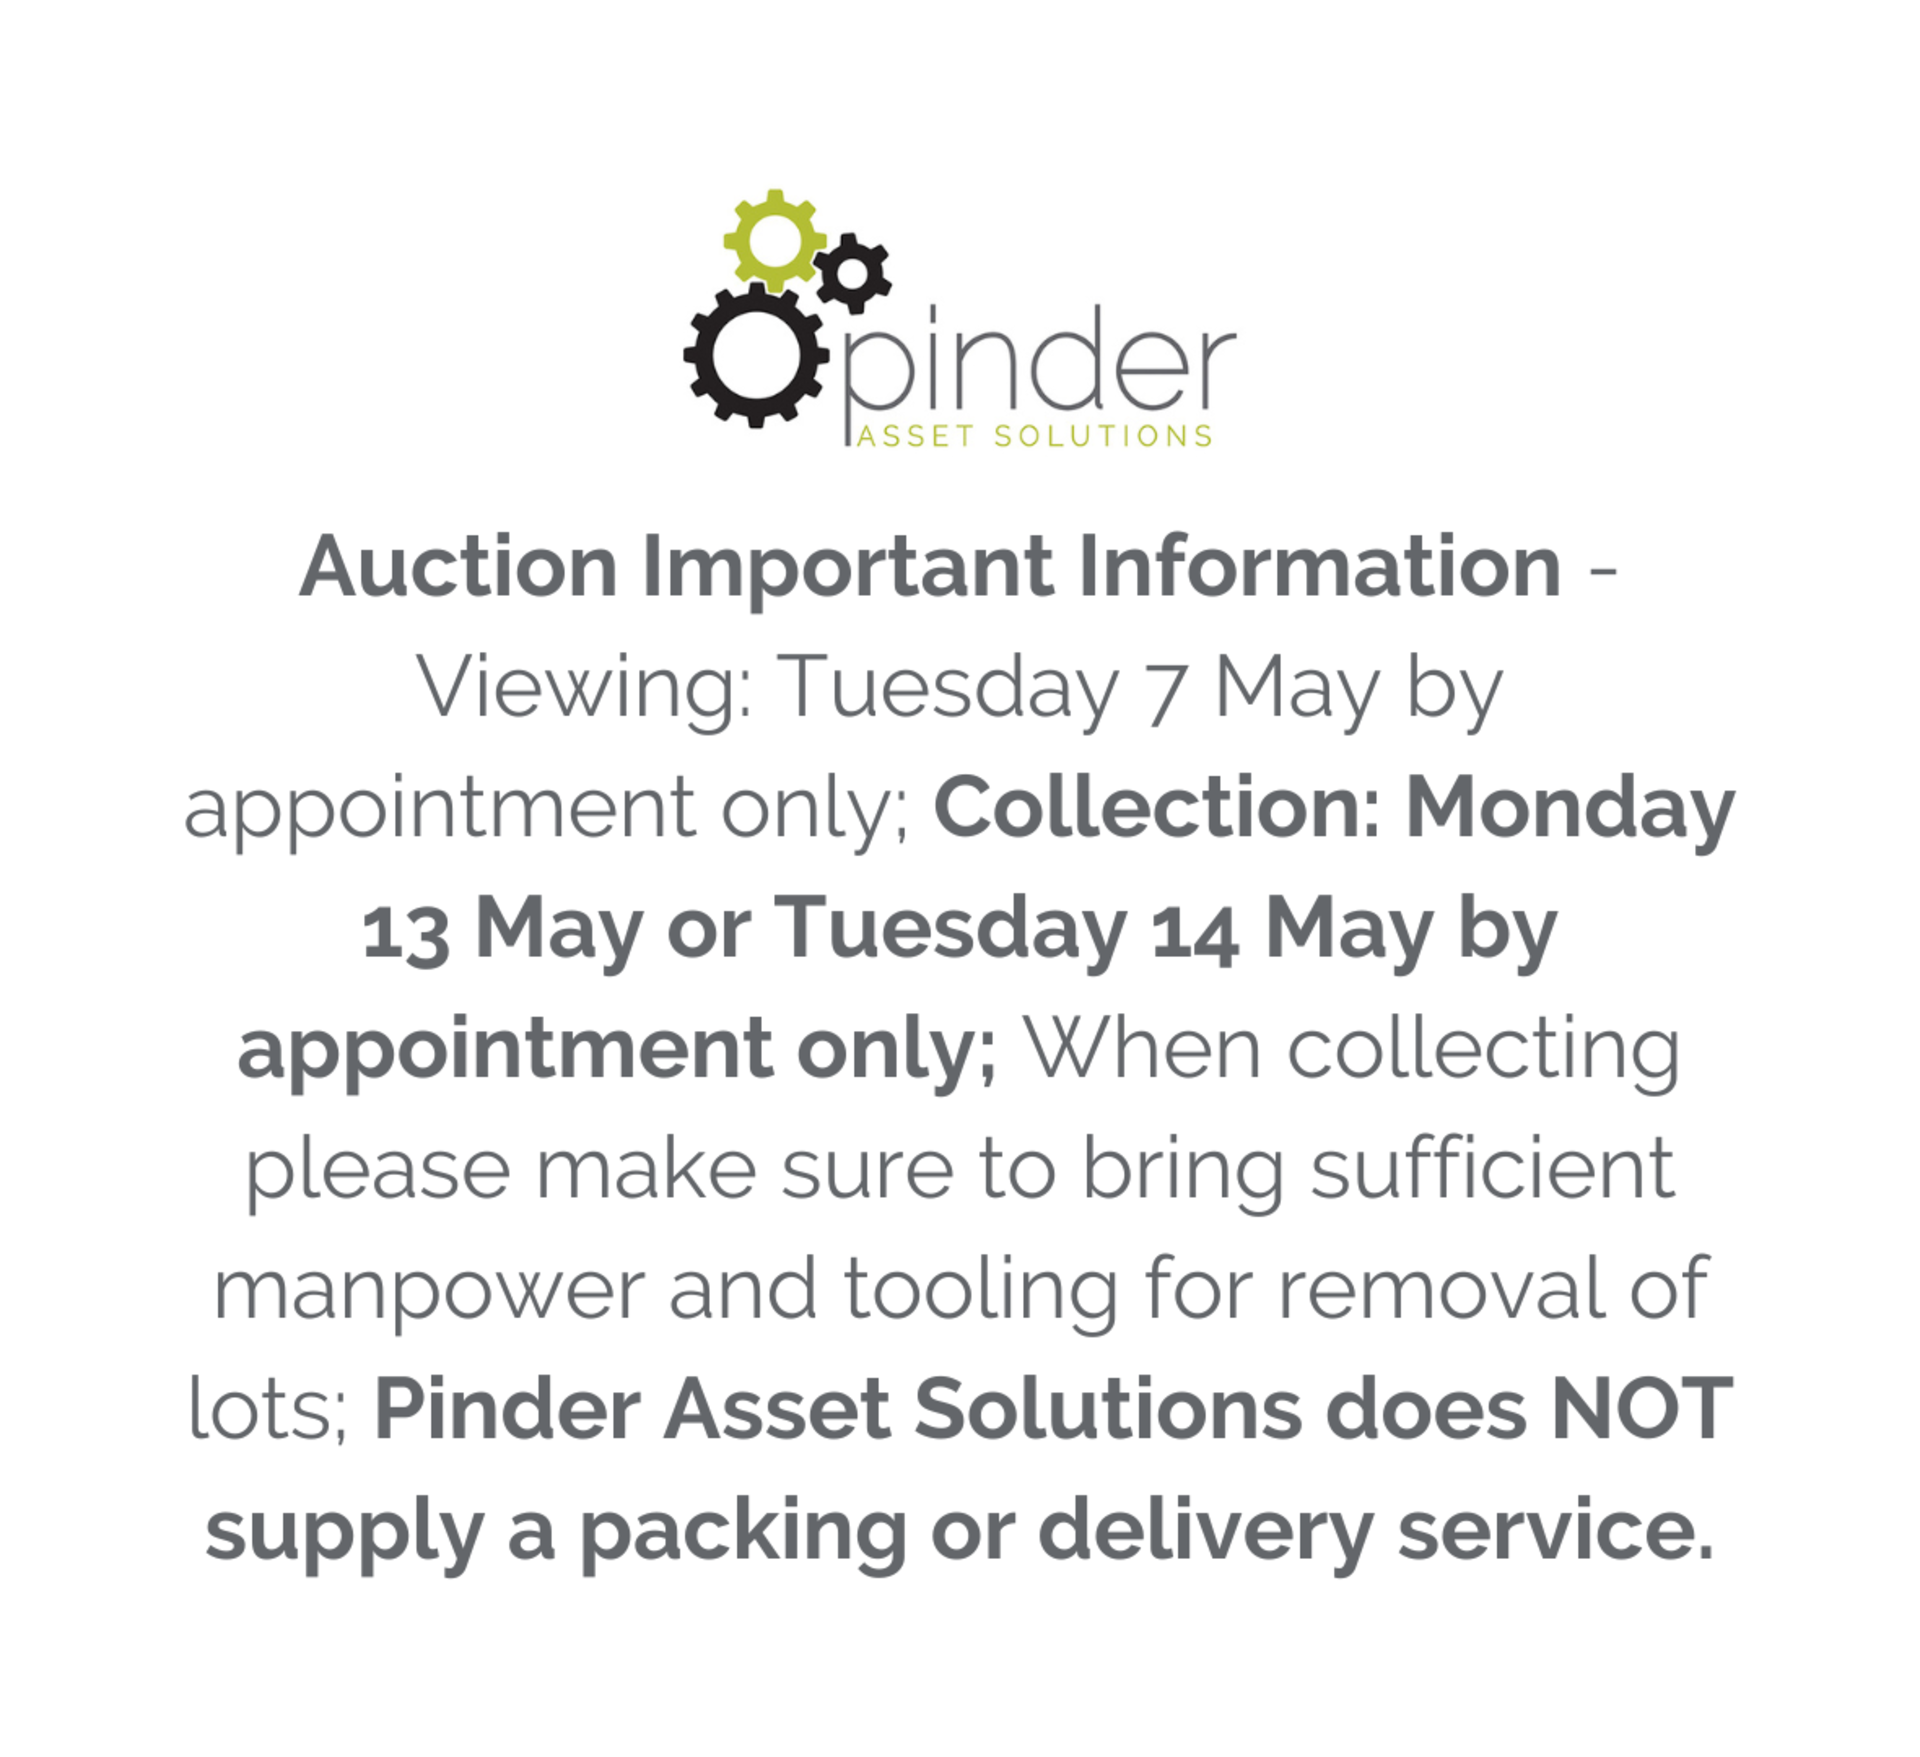 Auction Important Information - Viewing: Tuesday 7 May by appointment only; Collection: Monday 13